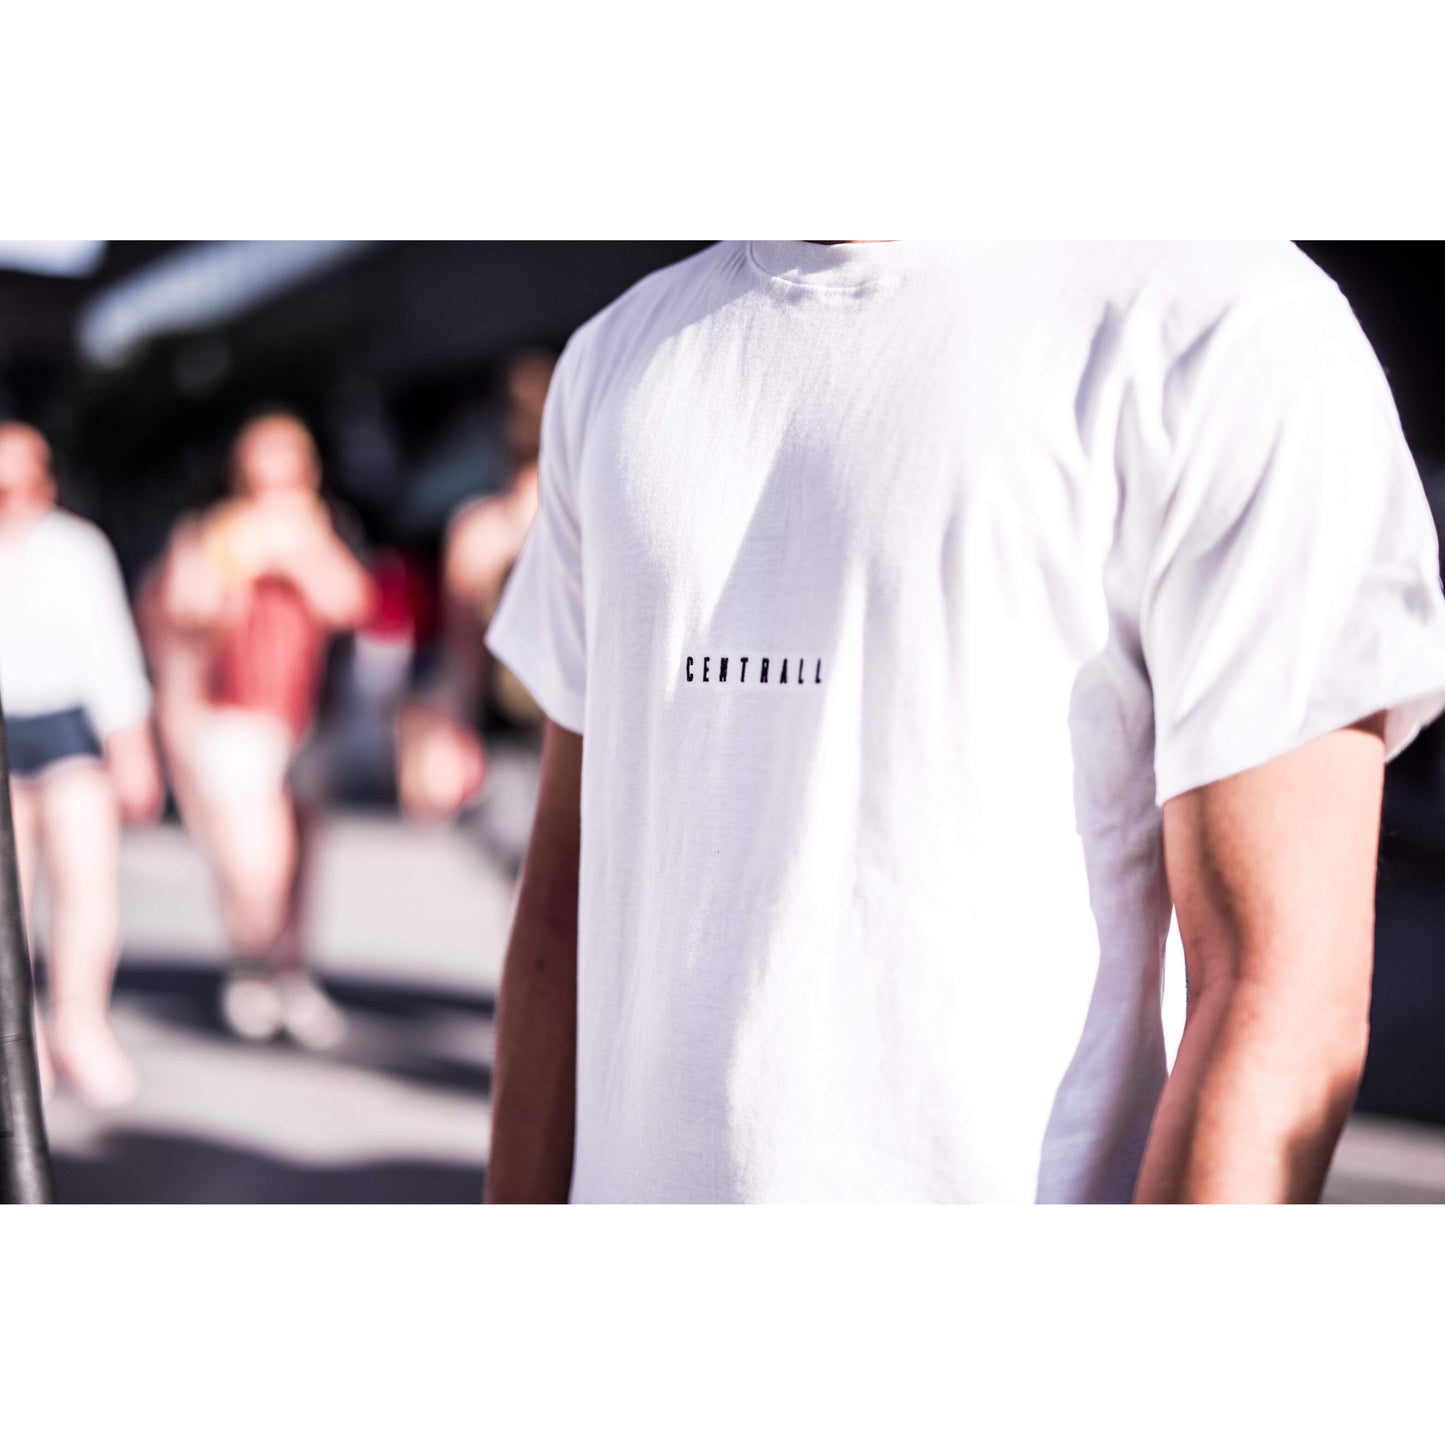 Centrall tee White - Centrall Online